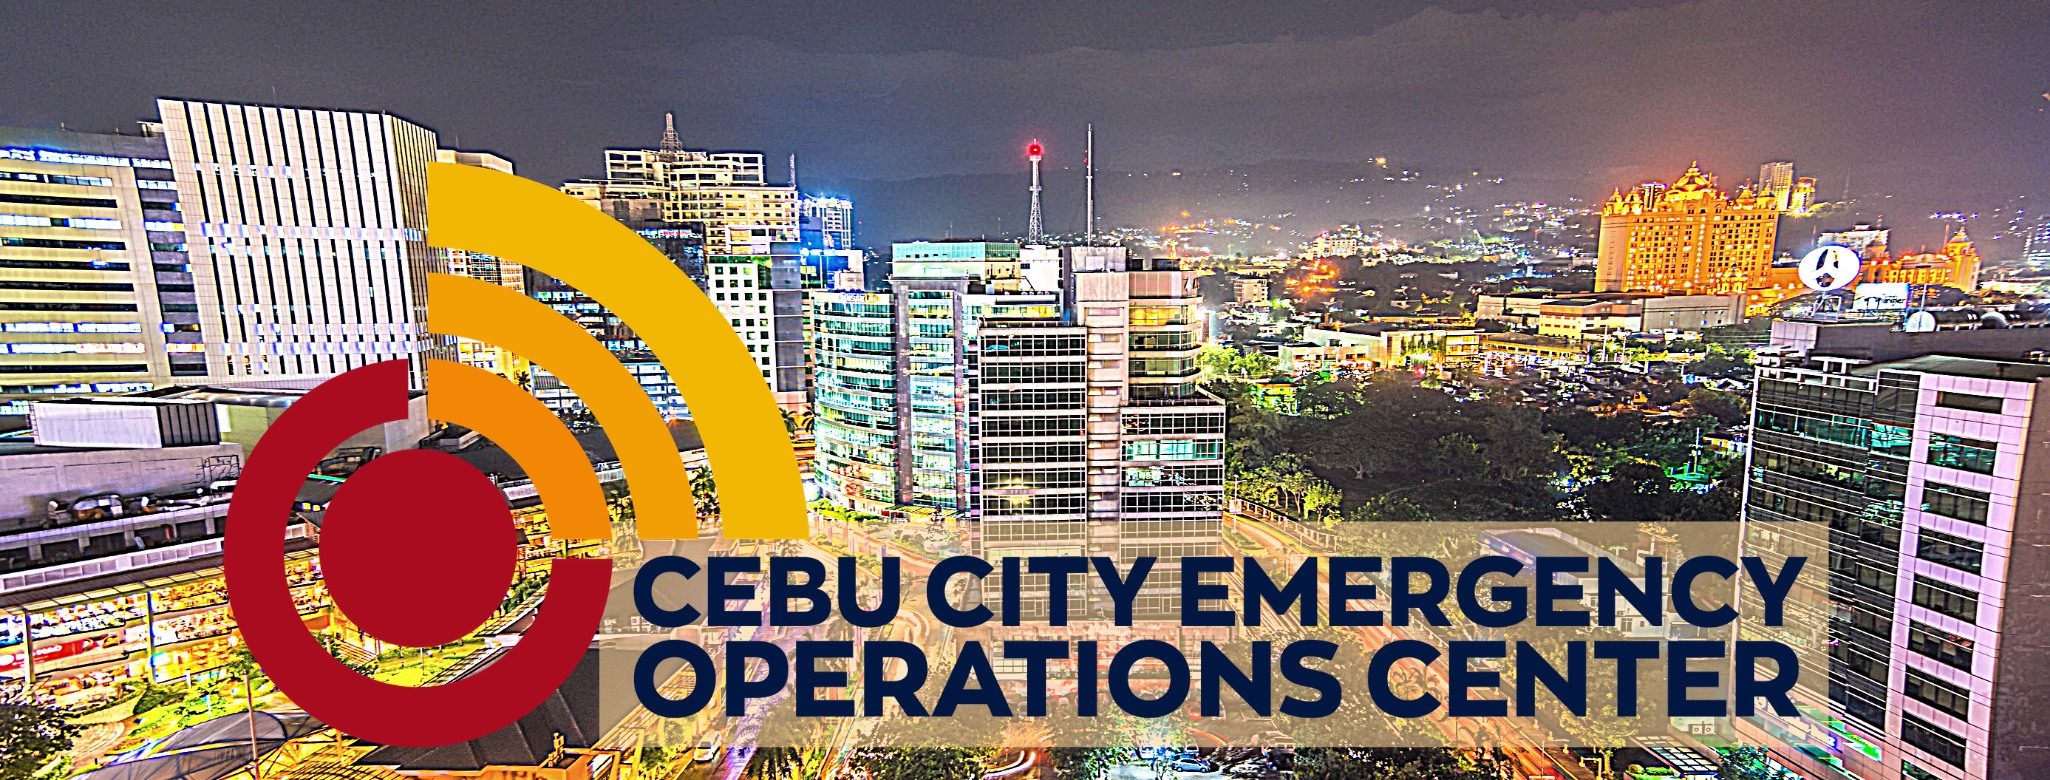 After 3 years, Cebu City closes COVID-19 emergency operations center